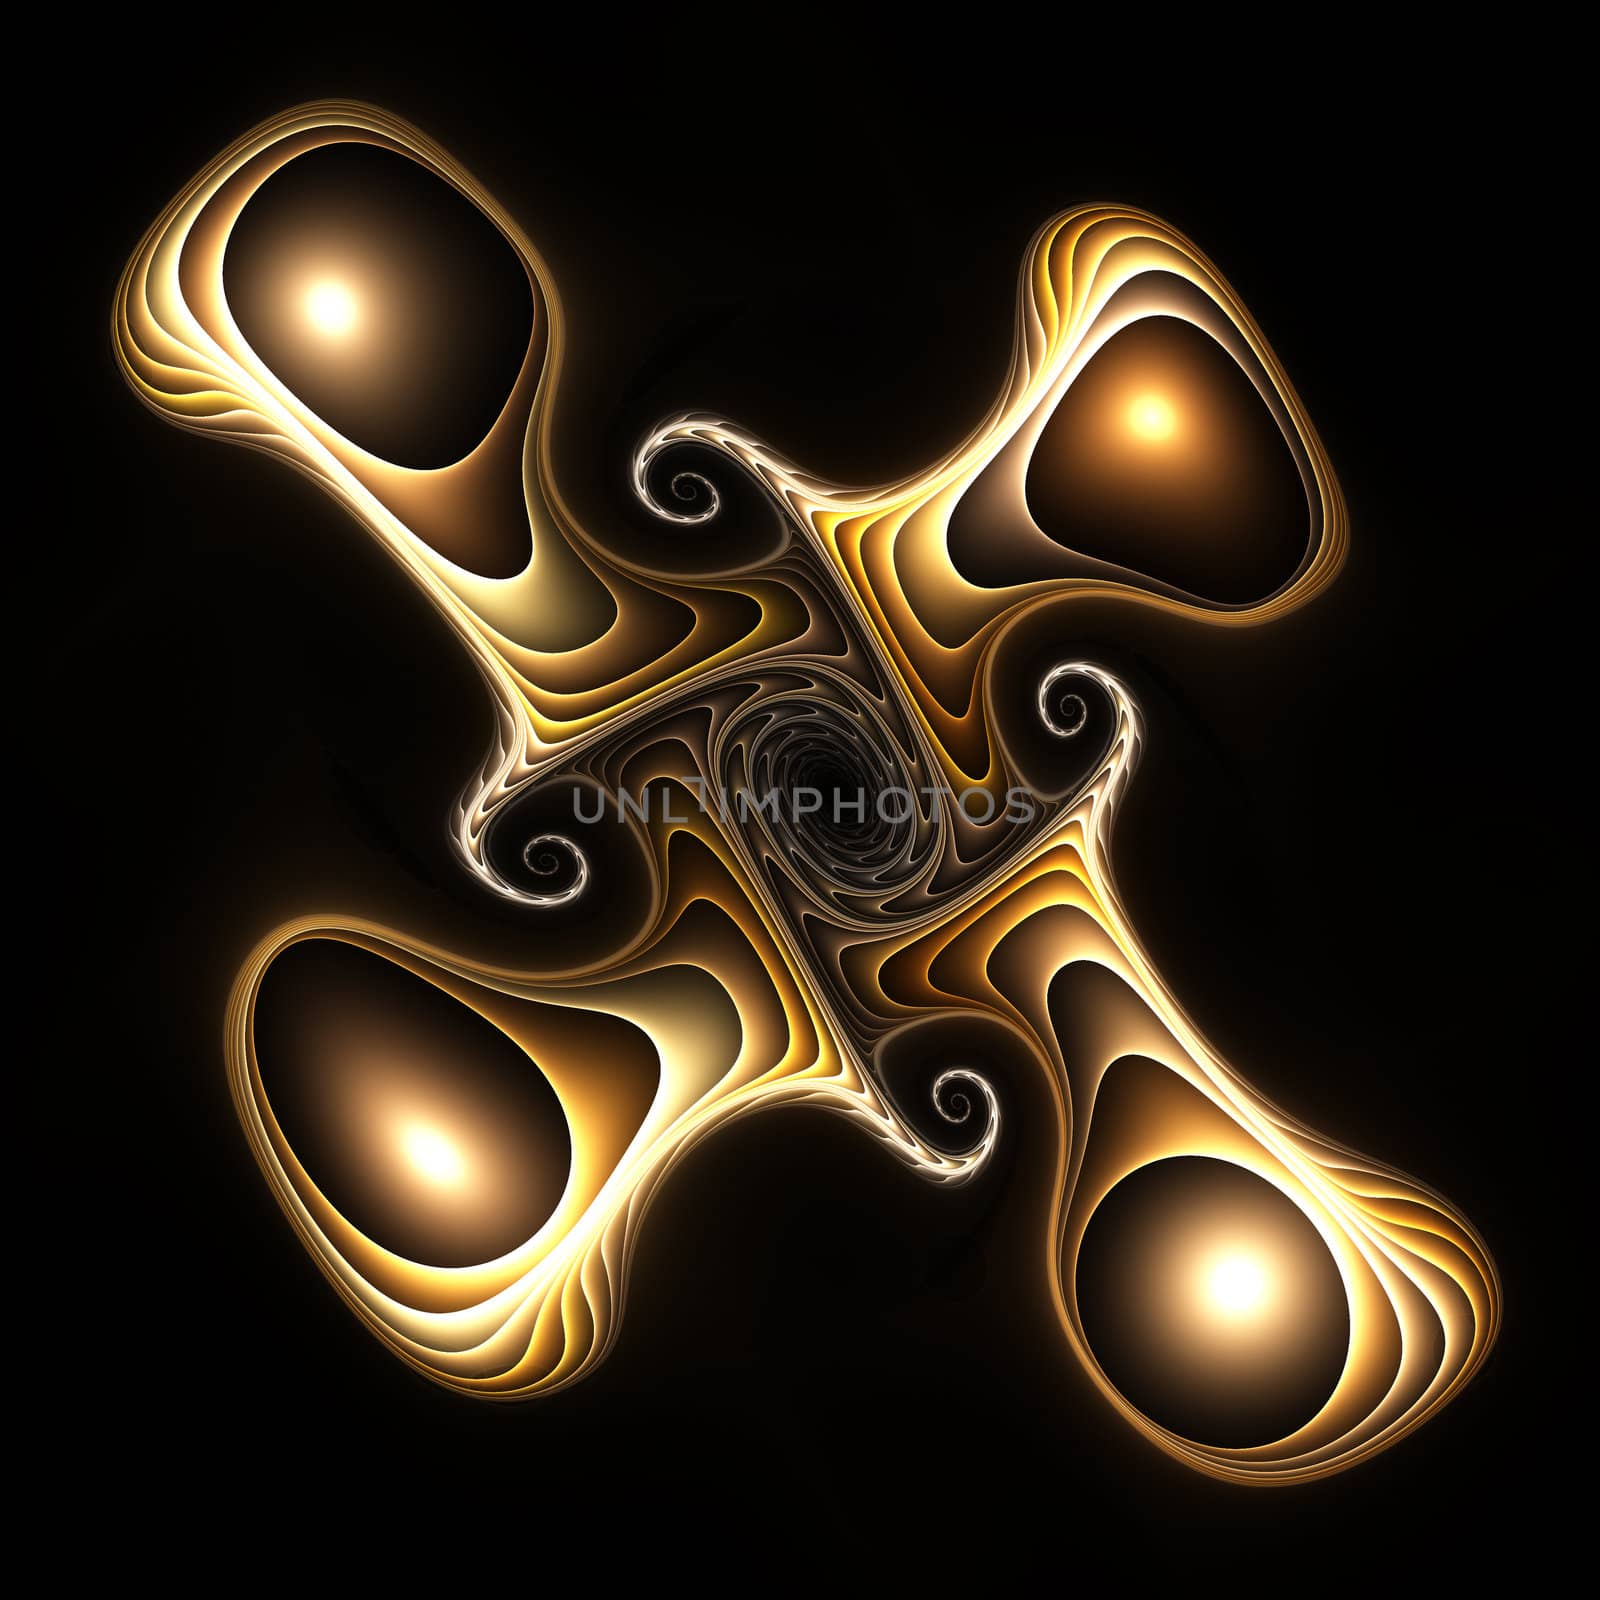 Abstract color image on a black background. Curves and ornaments by mozzyb